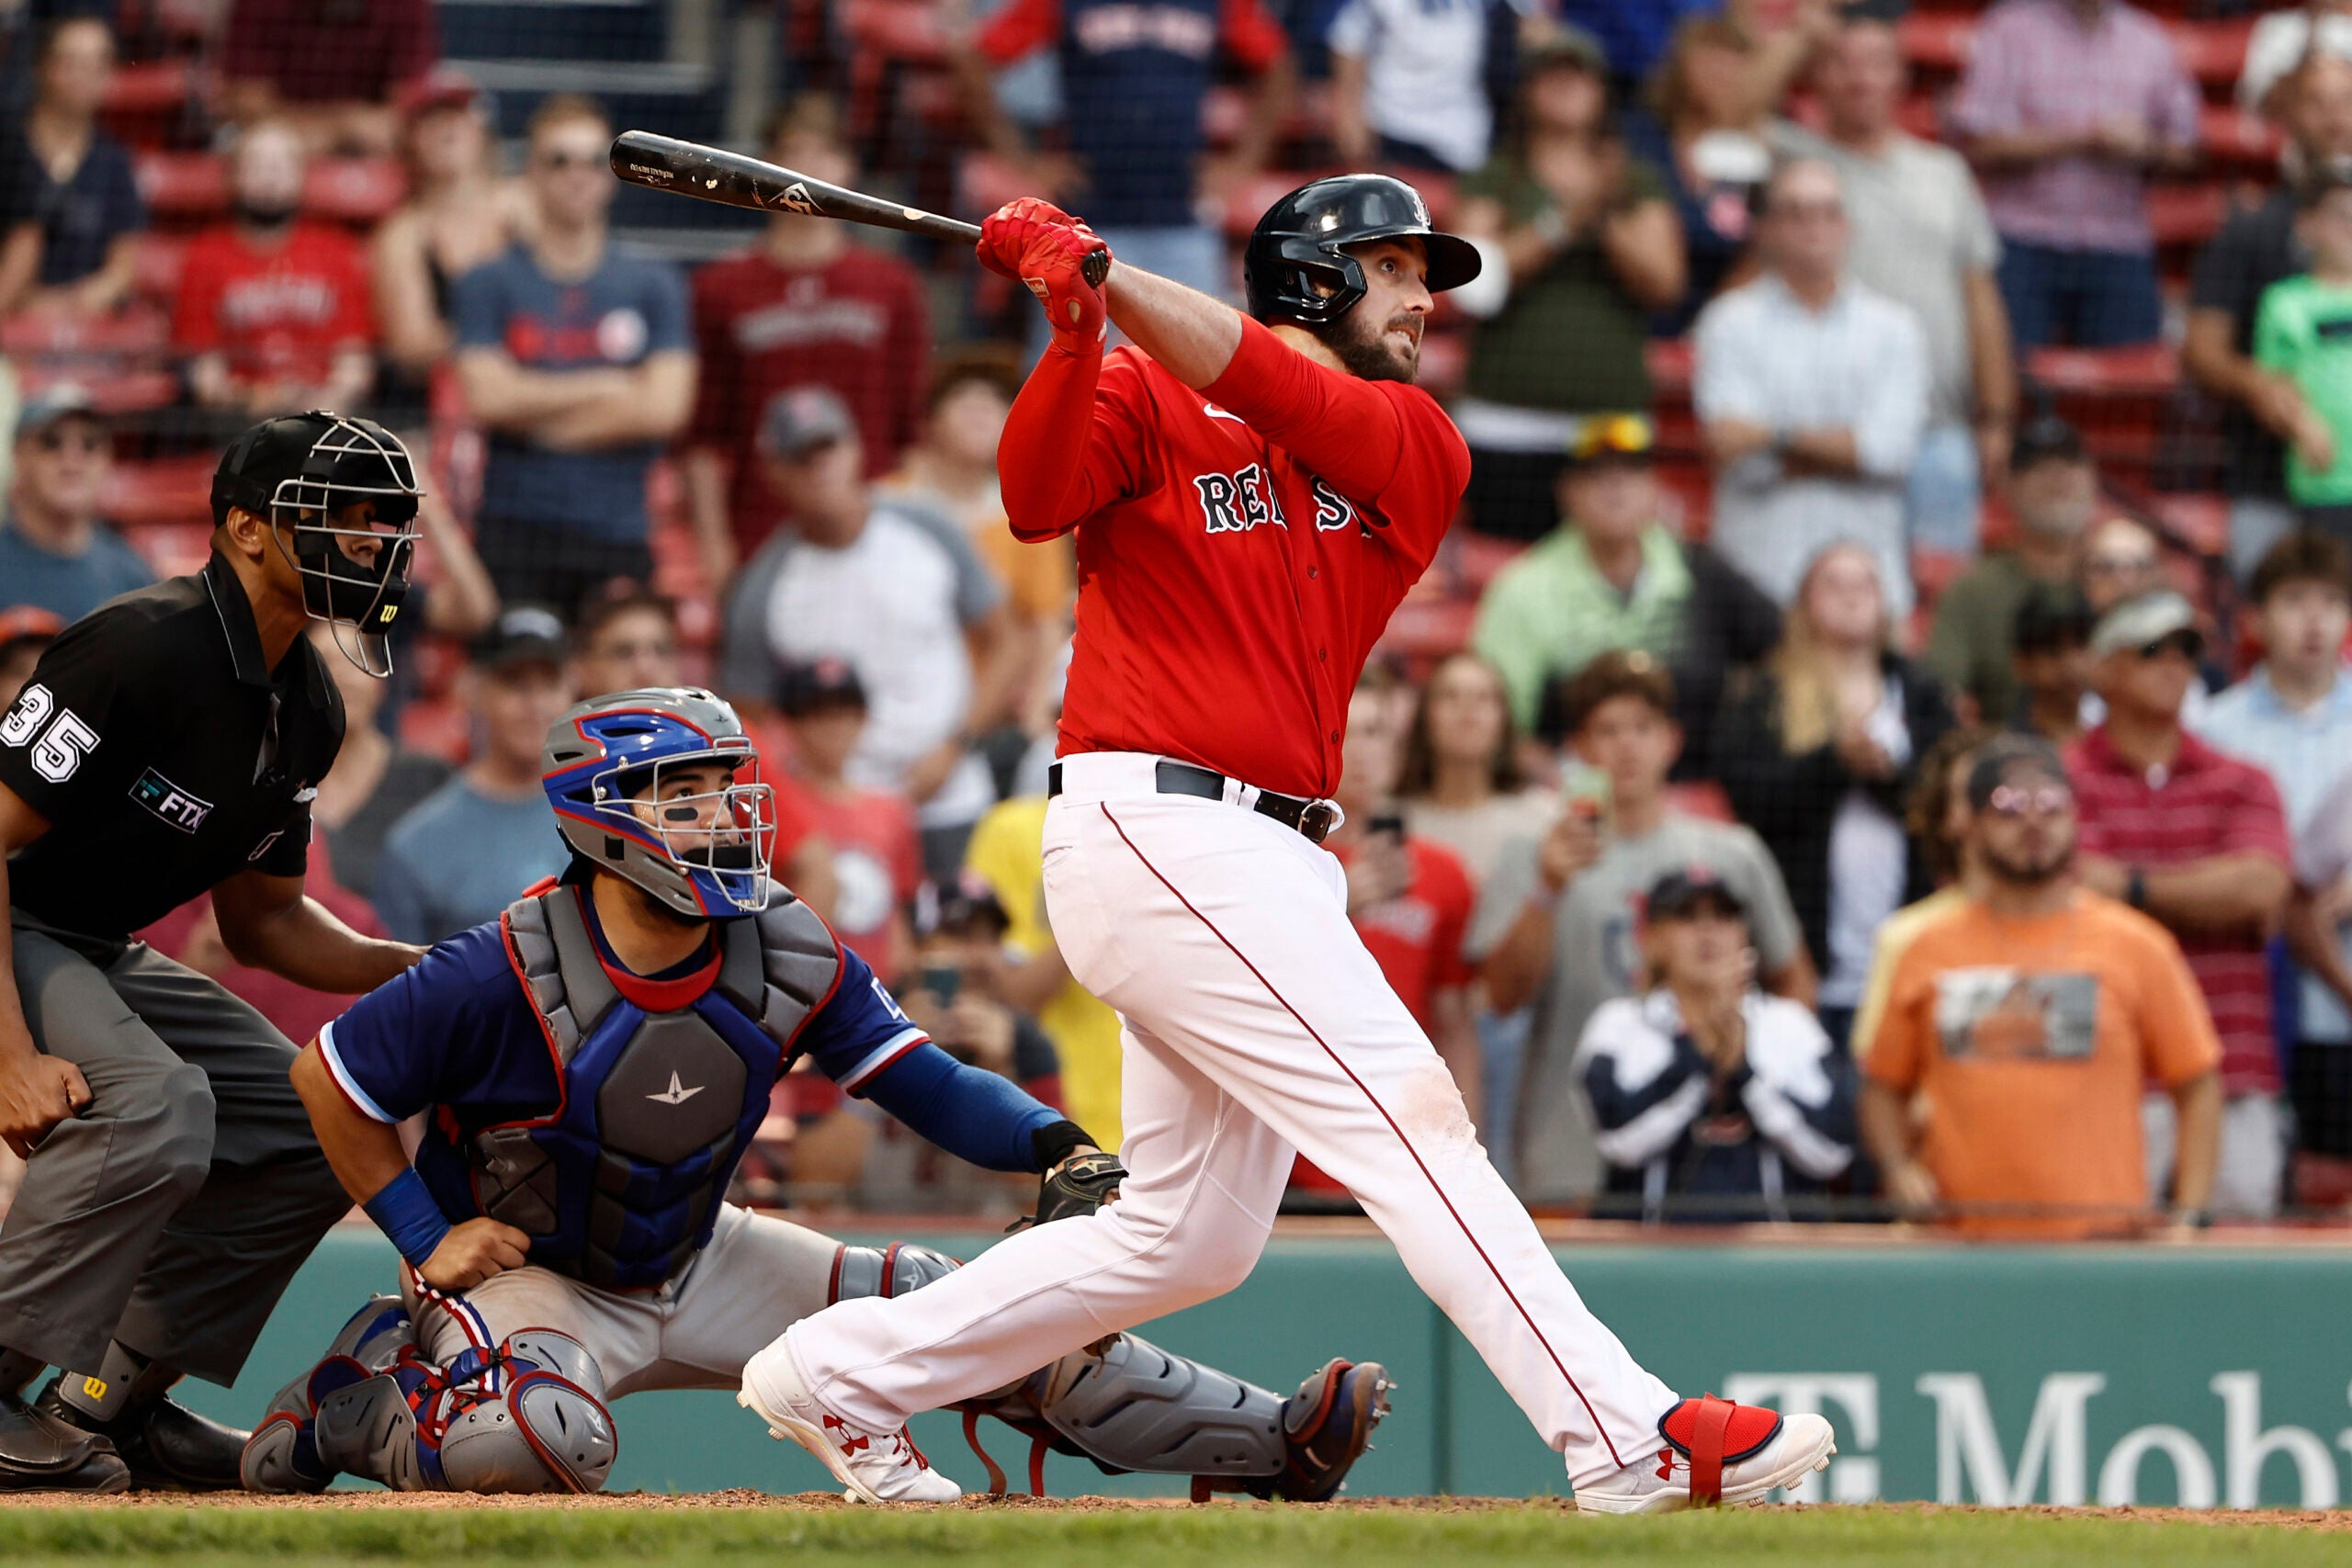 Red Sox's Travis Shaw, mother share close bond